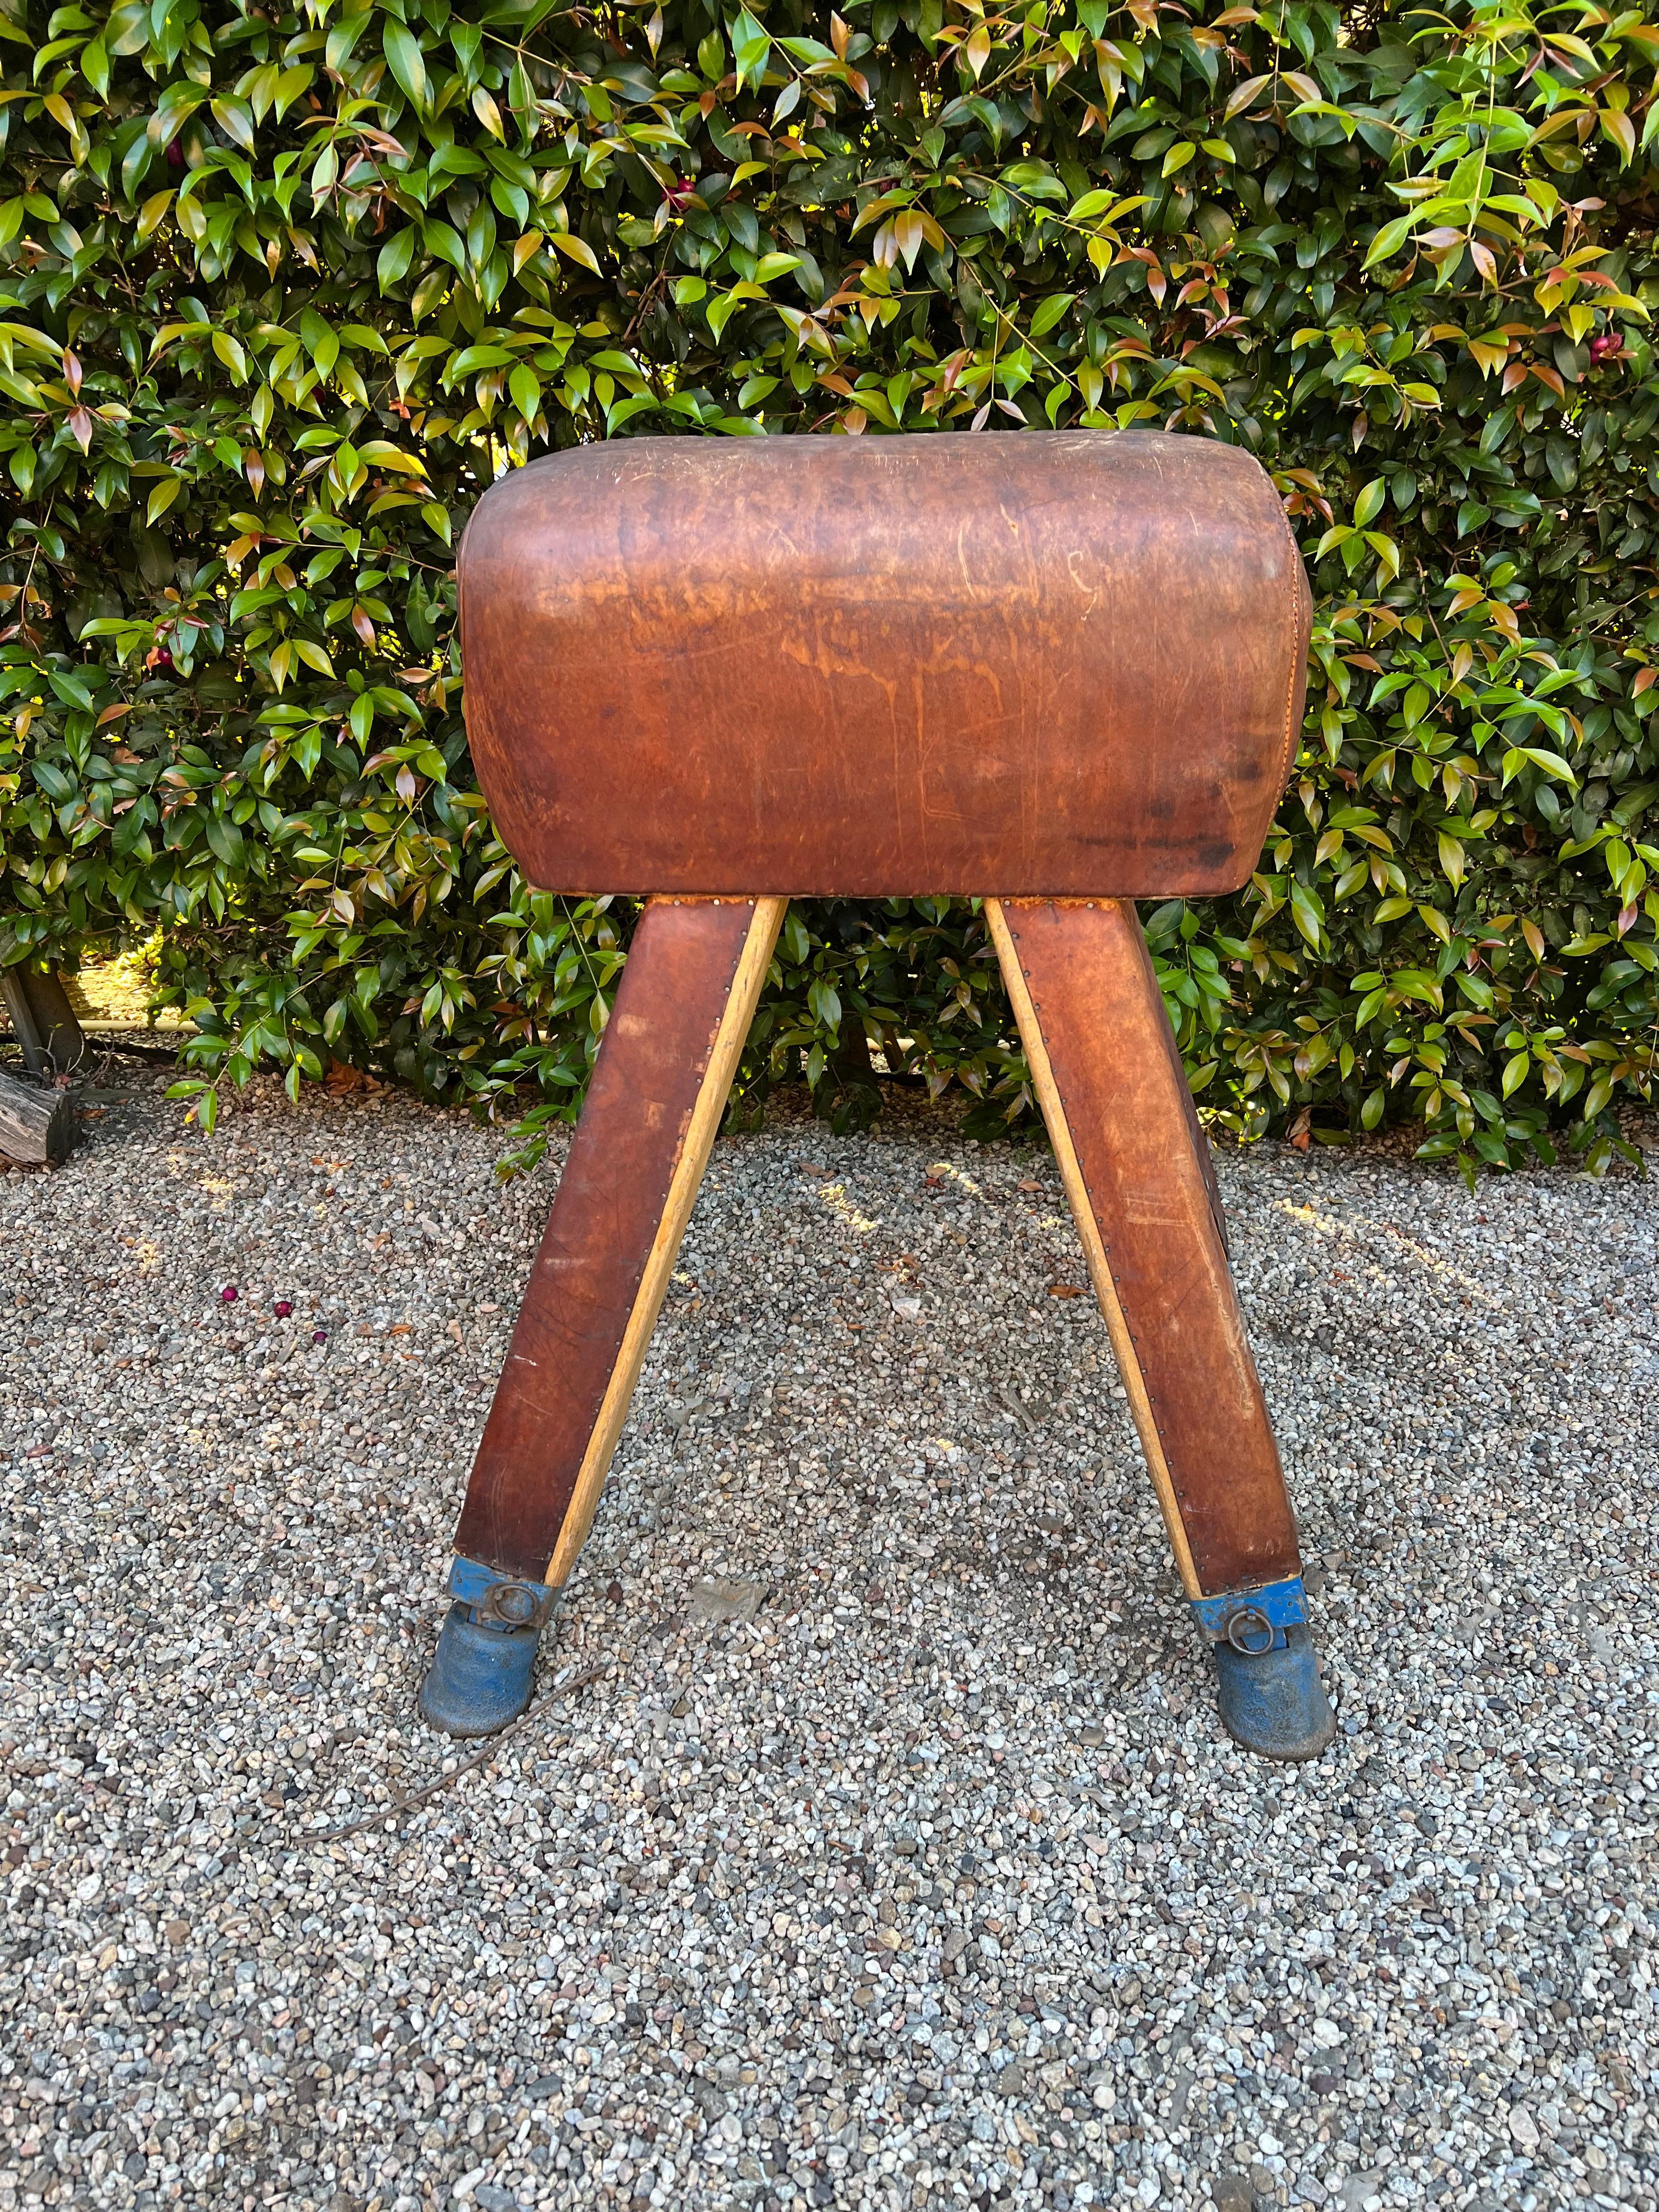 Hand-Crafted Gymnasium Leather Pommel Horse Bench Saddle Holder on Legs For Sale